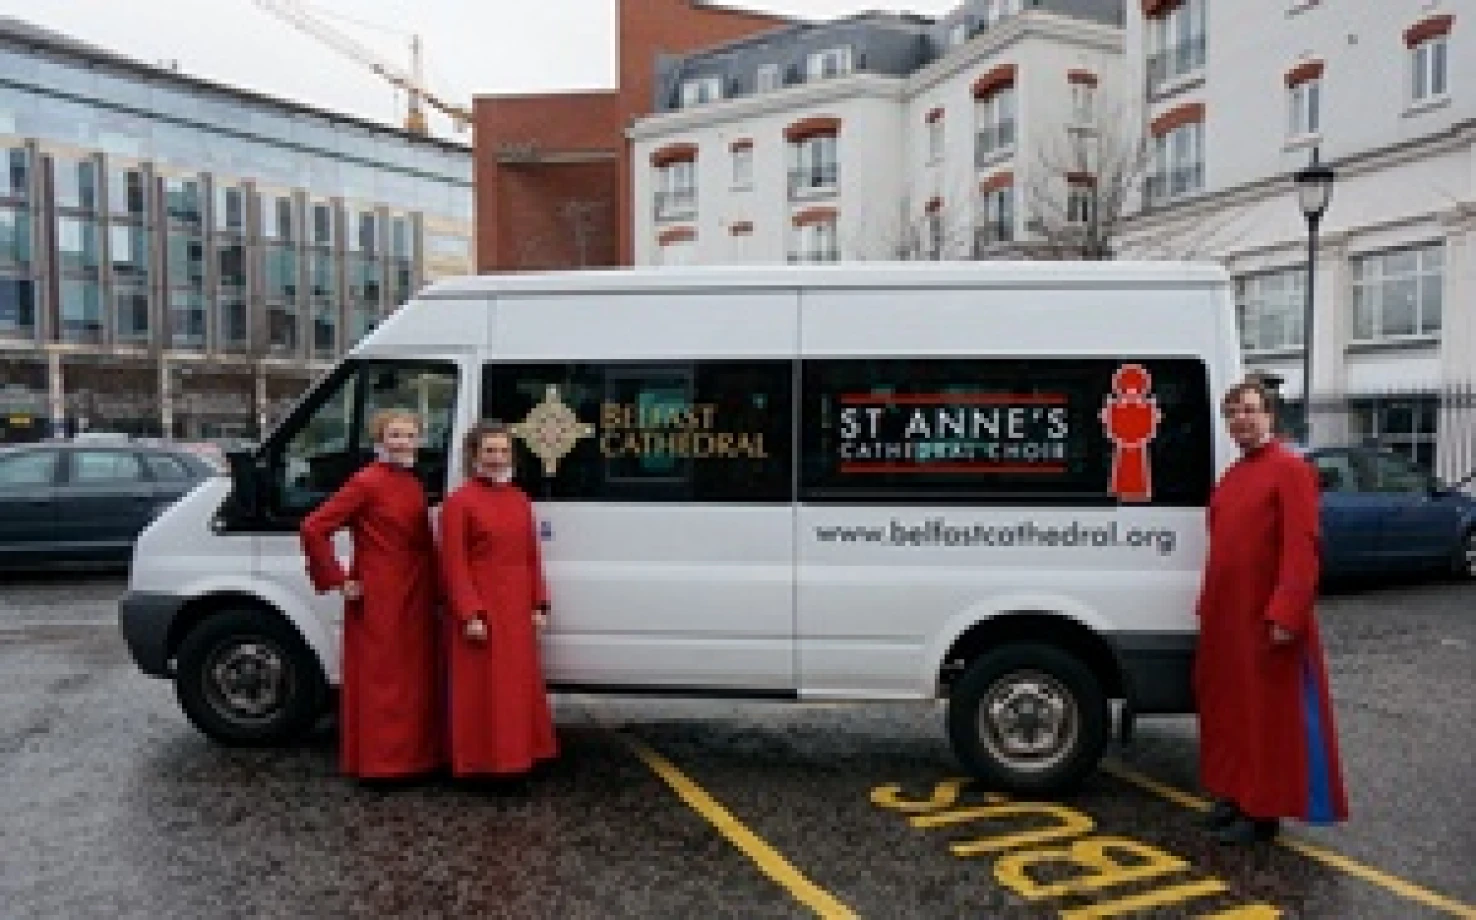 Eye–catching new logos on St Anne’s Cathedral Choir buses